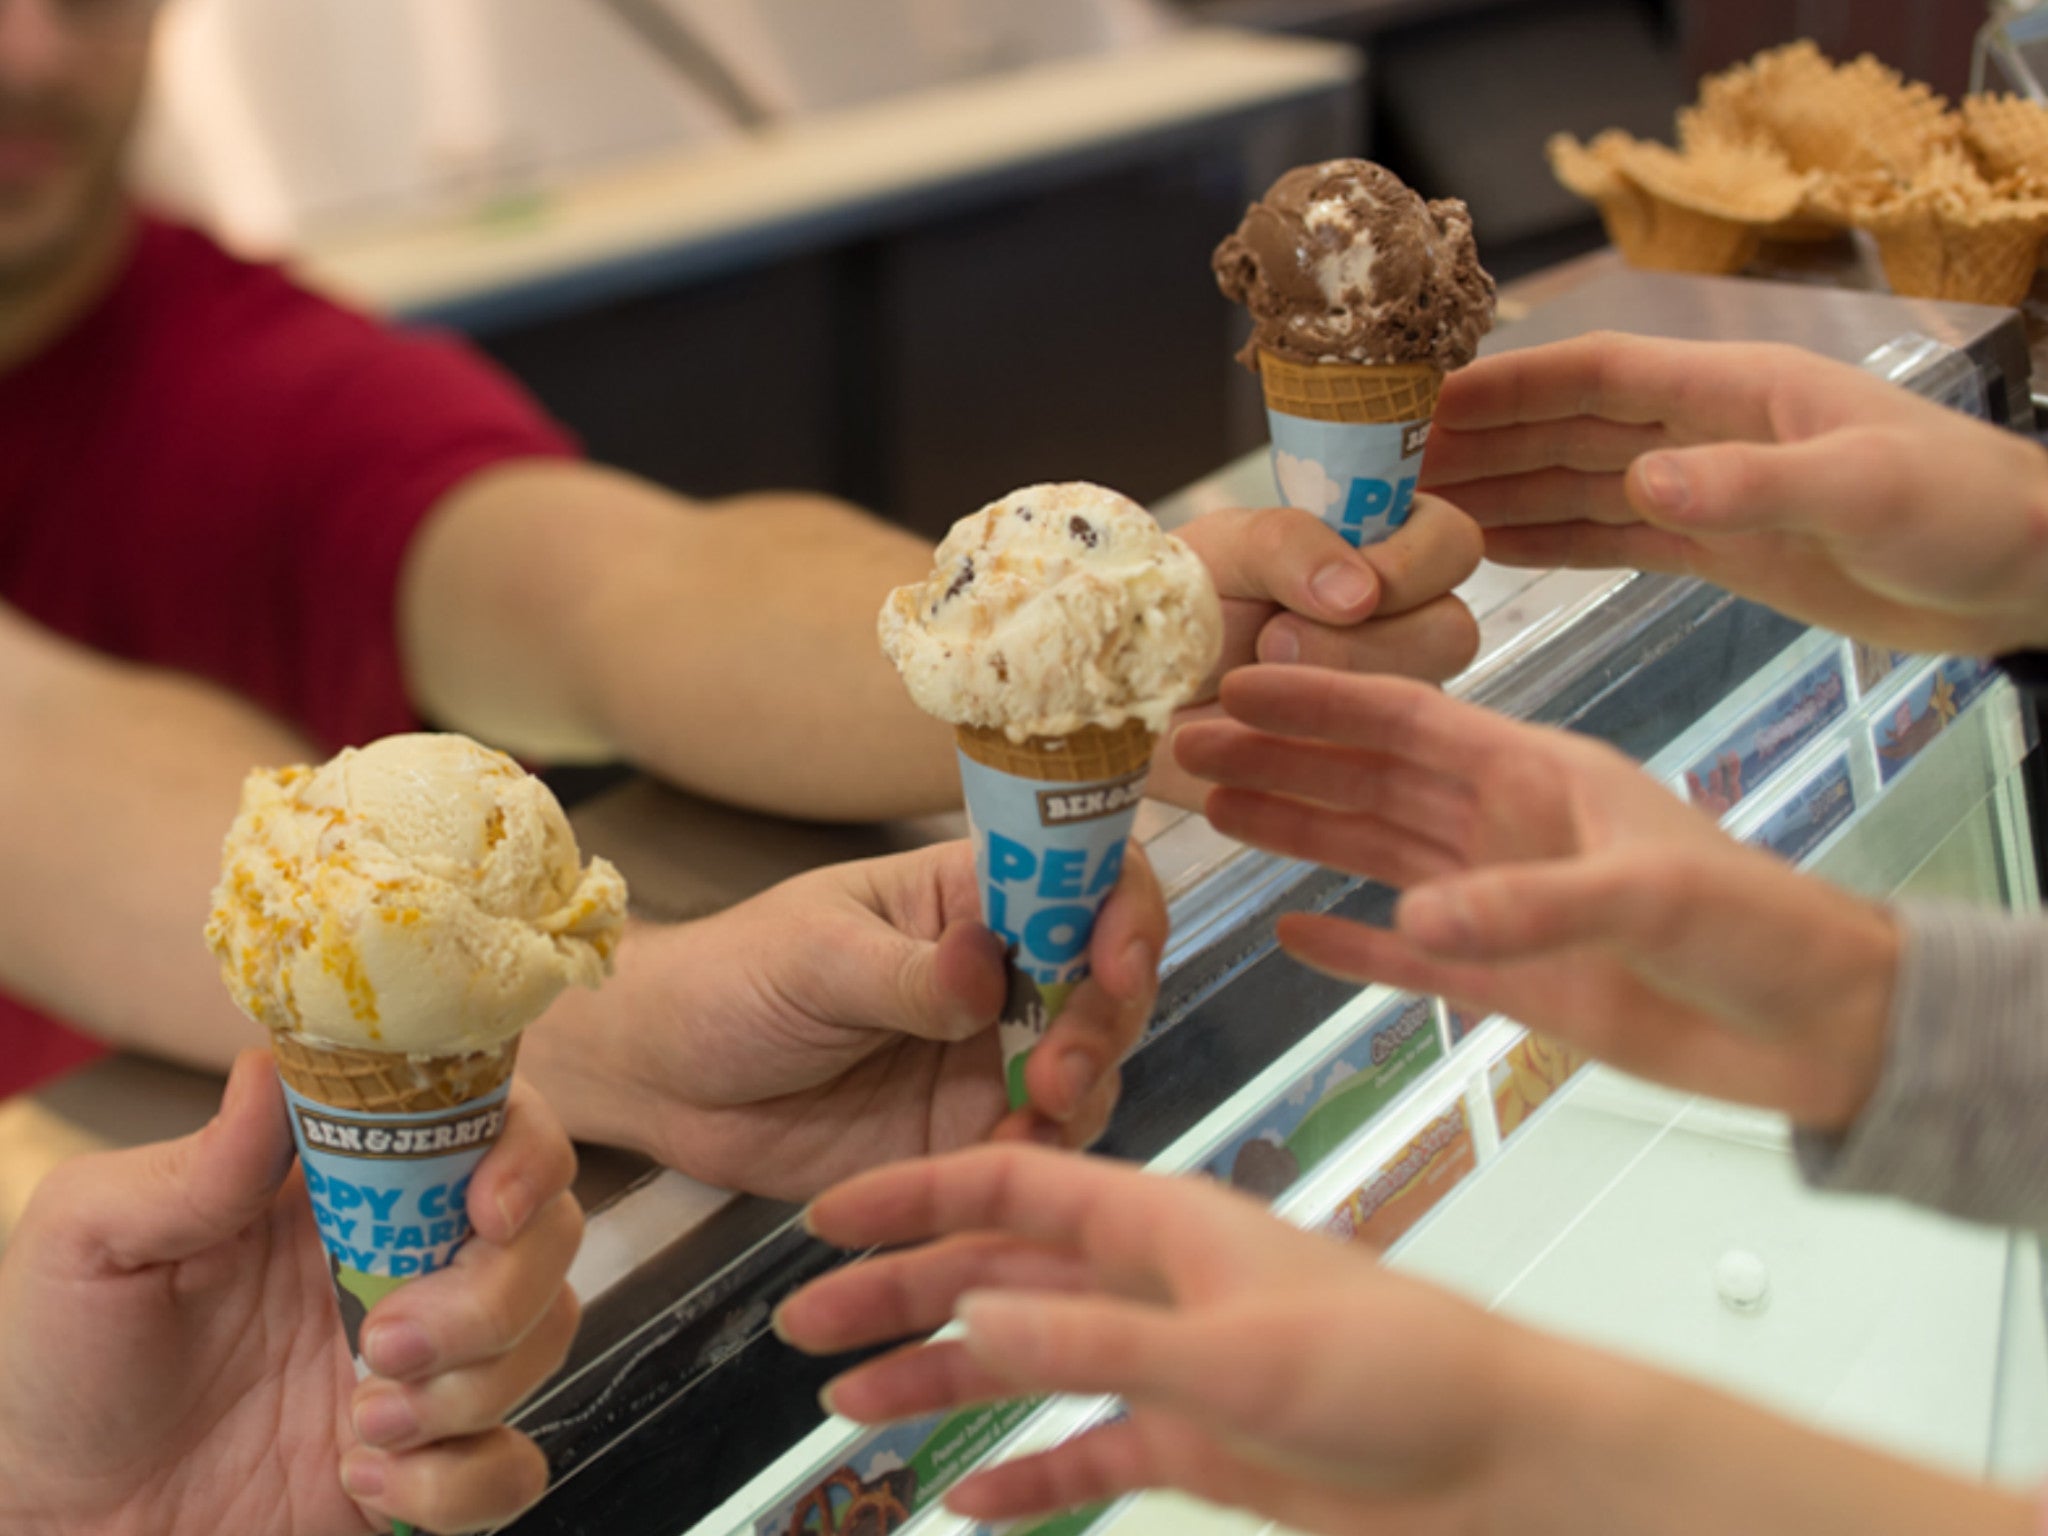 Ben & Jerry's Free Cone Day Where can you get free ice cream? The